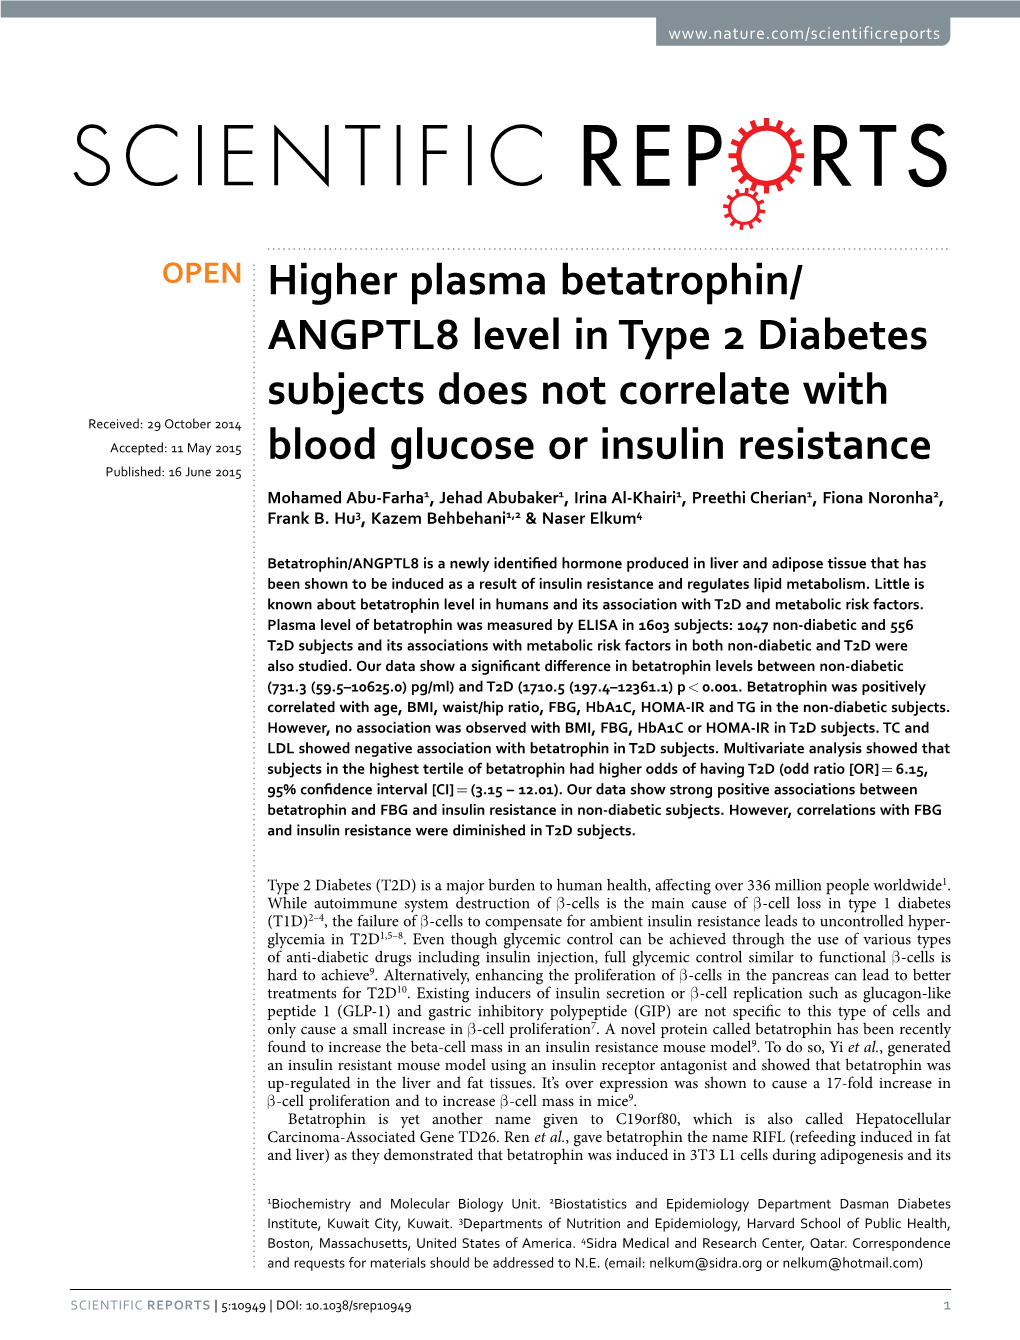 Higher Plasma Betatrophin/ANGPTL8 Level in Type 2 Diabetes Subjects Does Not Correlate with Blood Glucose Or Insulin Resistance